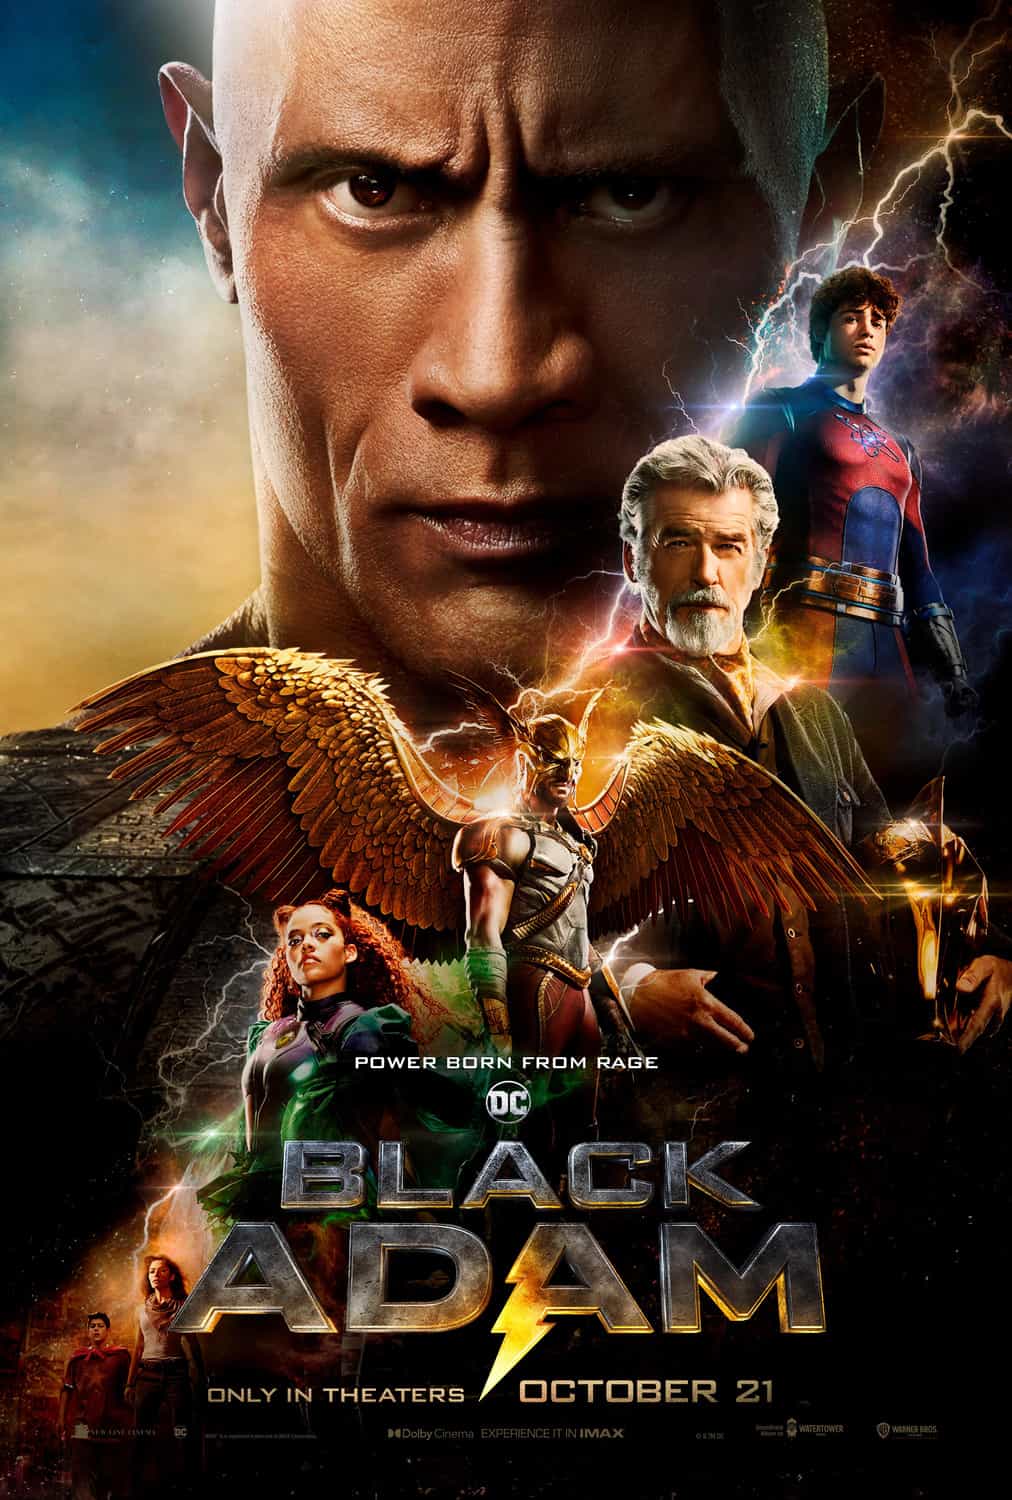 US Box Office Weekend Report 4th - 6th November 2022:  Black Adam remains at the top of the US box office with One Piece Film: Red making its debut at 2